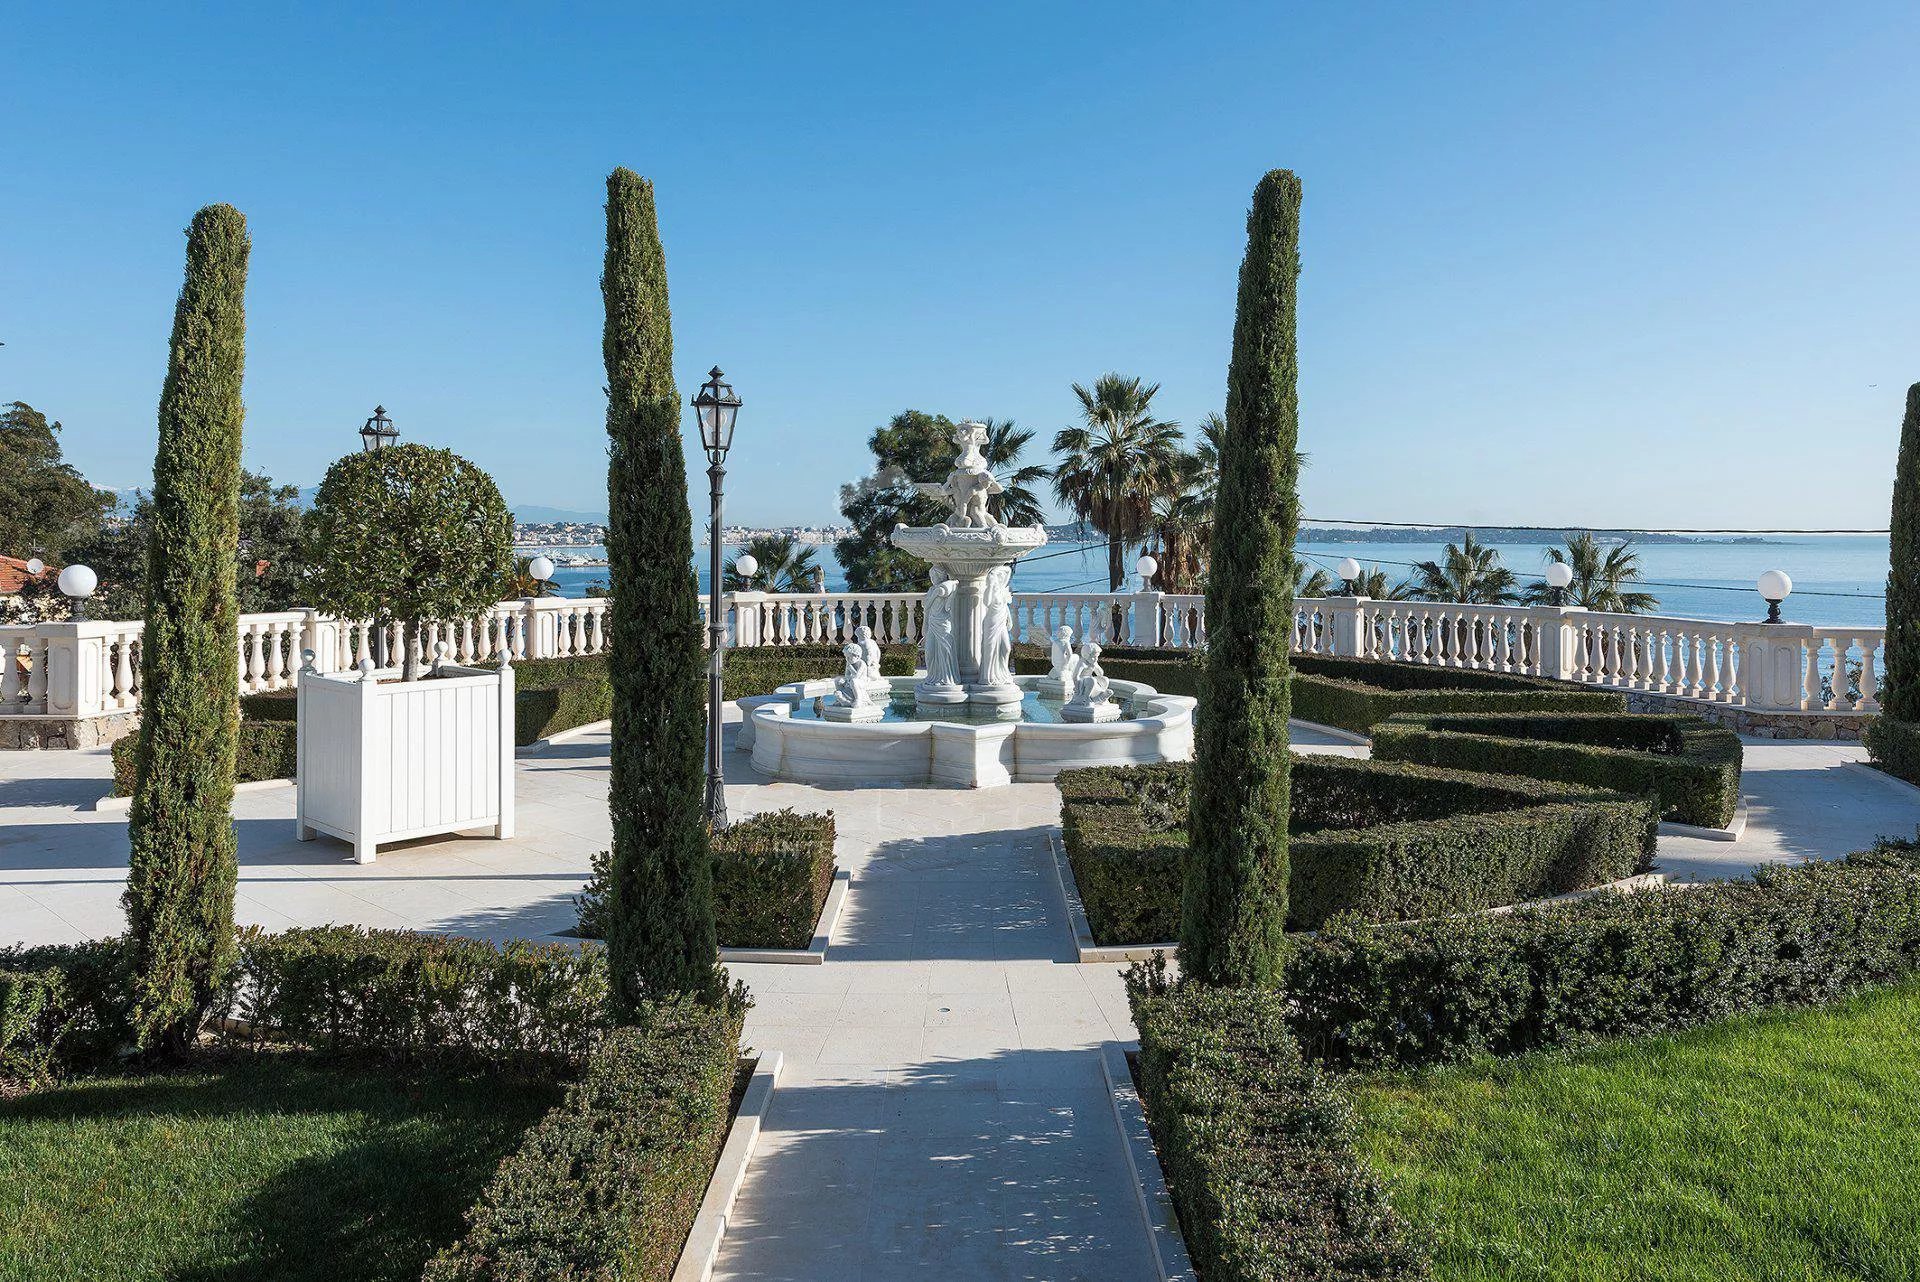 Villa Horizons at the gates of Cannes